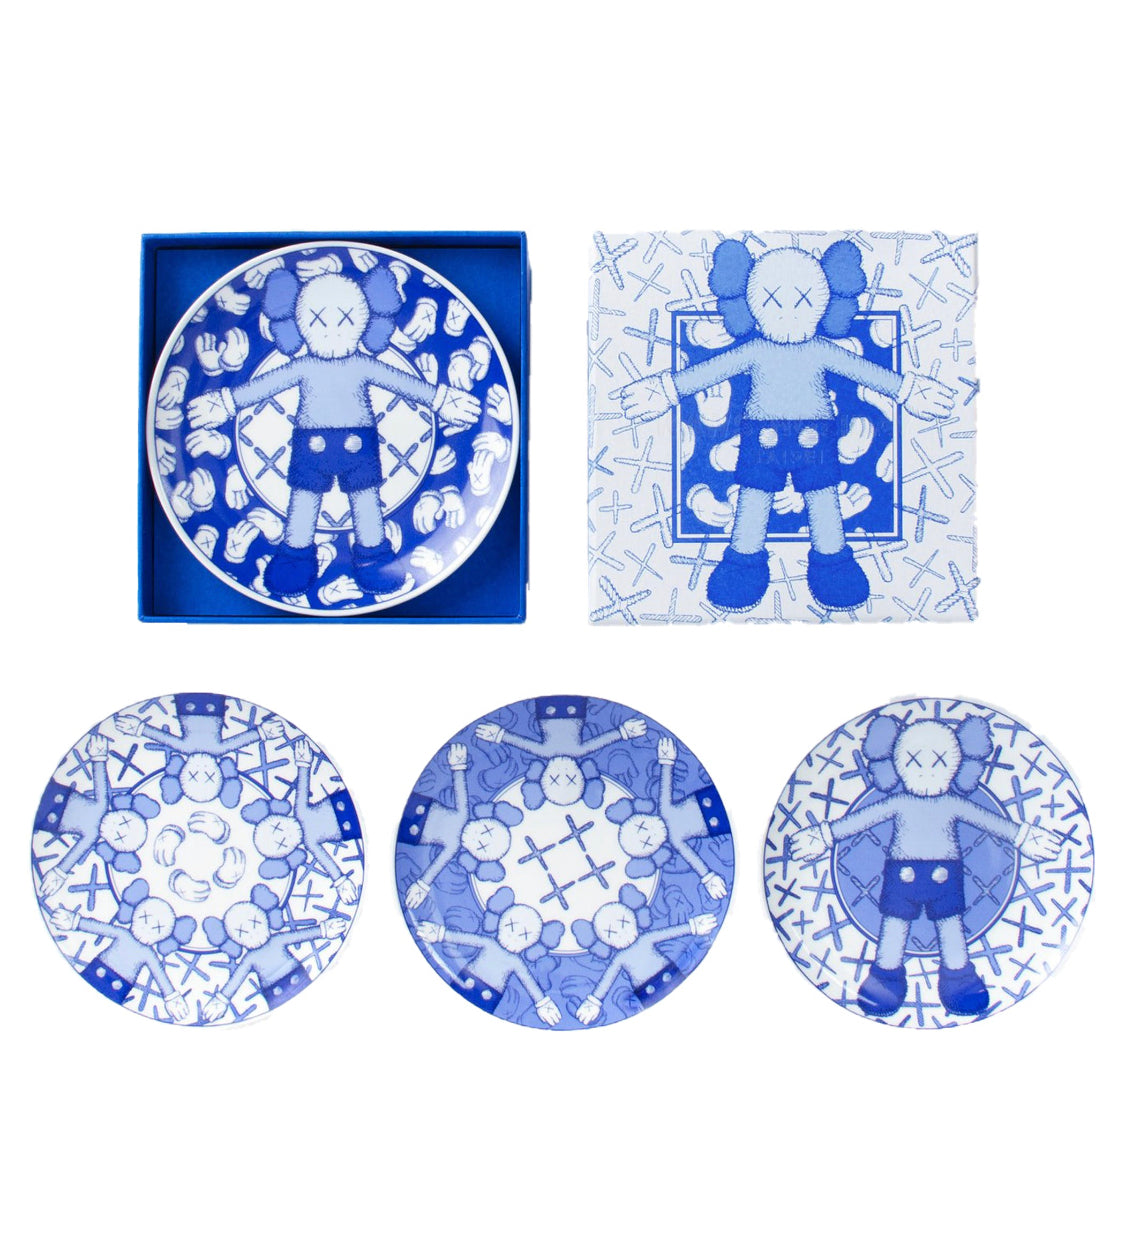 KAWS - HOLIDAY Ceramic Plate Set (Blue and White) (Set of 4), 2019